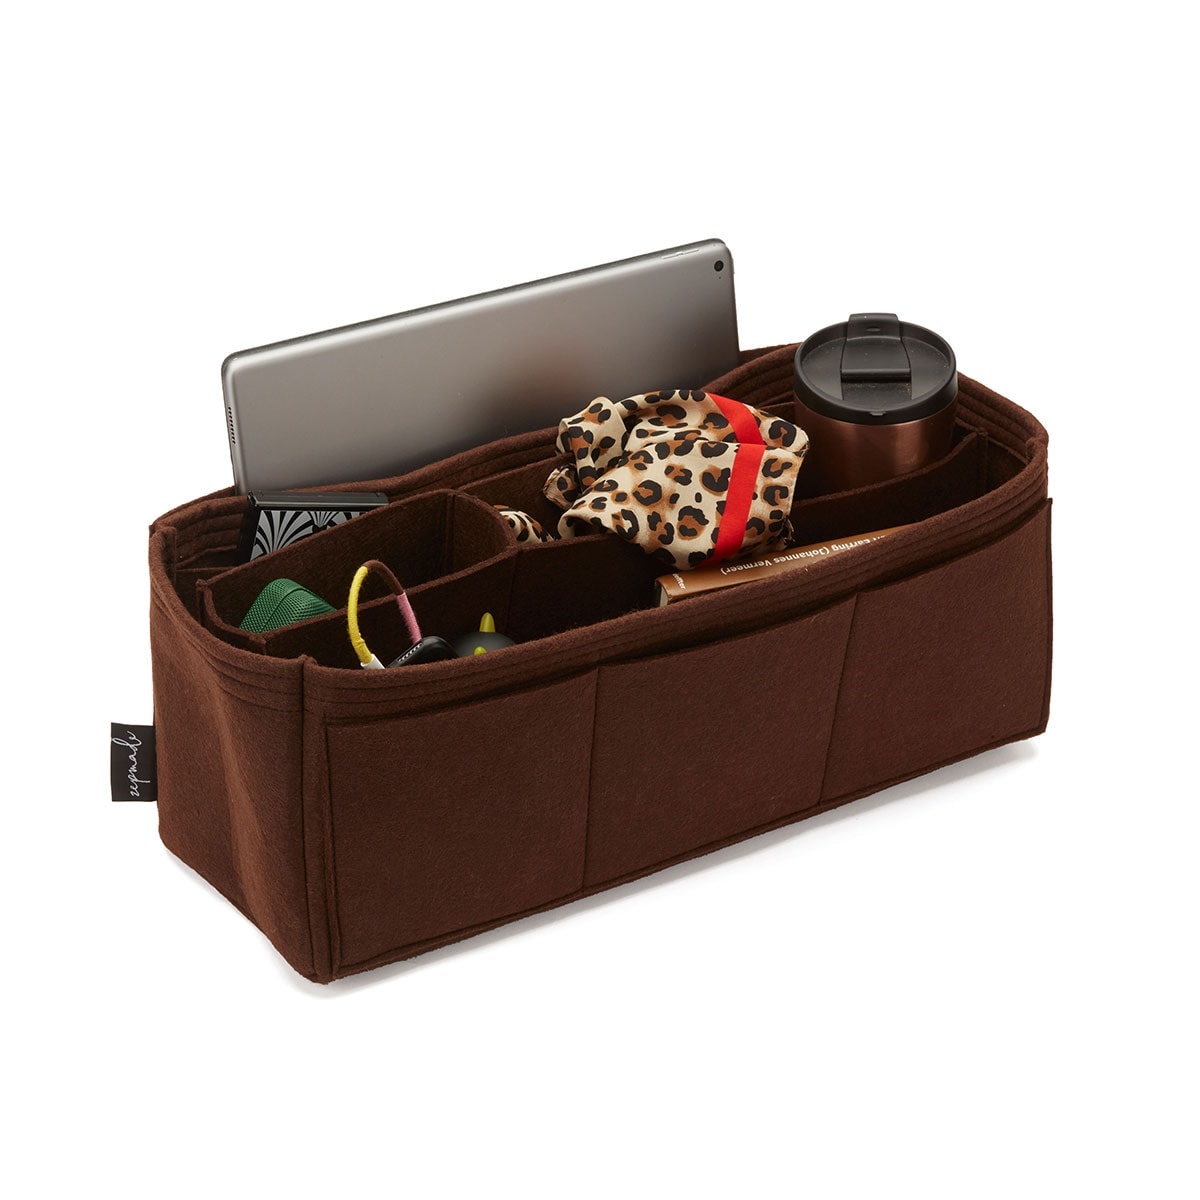 Louis Vuitton Artsy Organizer Insert, Bag Organizer with Middle Compartment  and Exterior Pockets